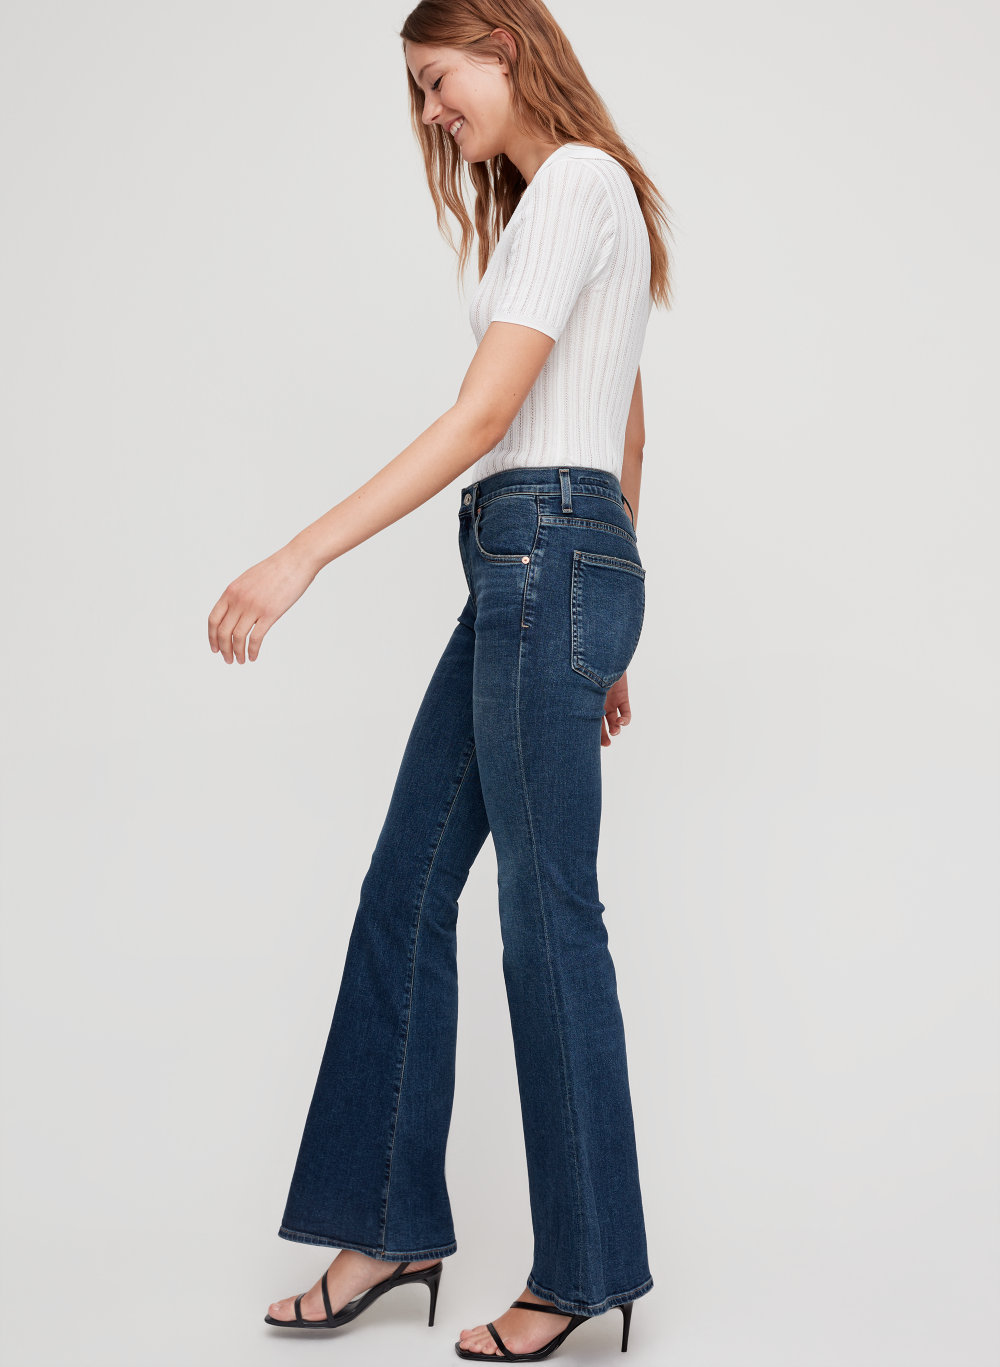 citizens of humanity chloe flare jeans